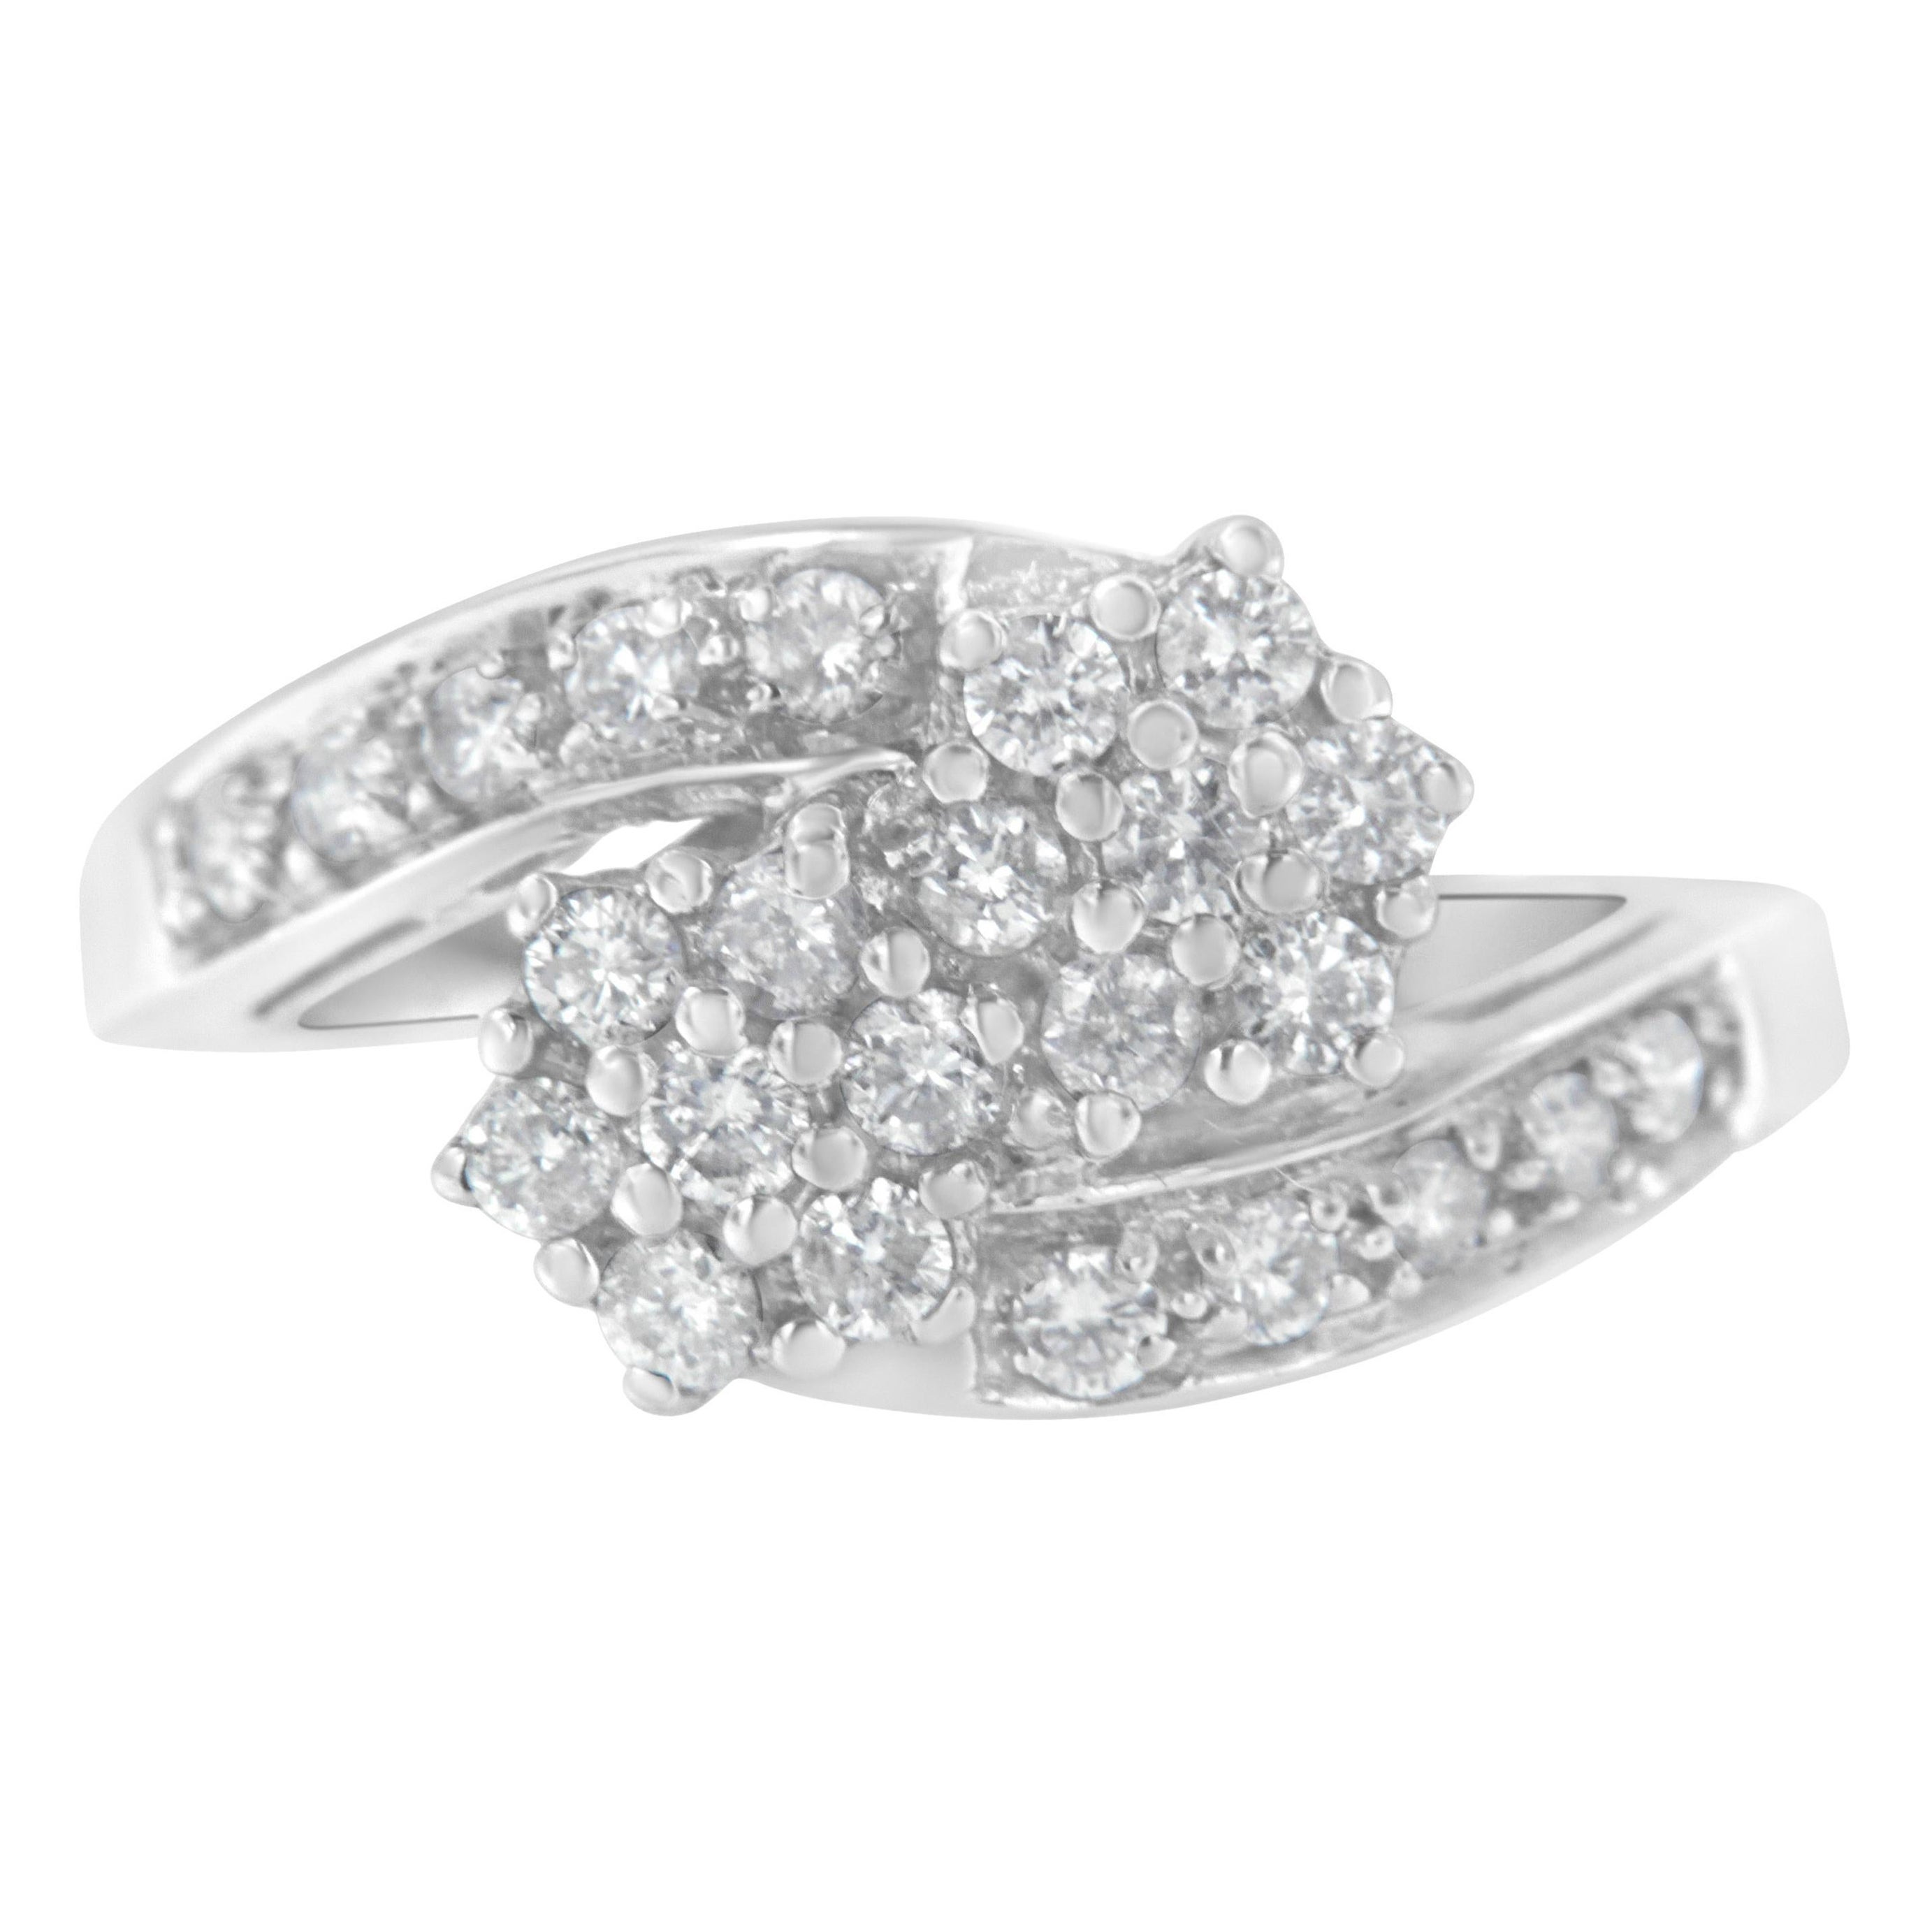 14K White Gold 7/8 Carat Diamond Cluster Ring Band For Sale